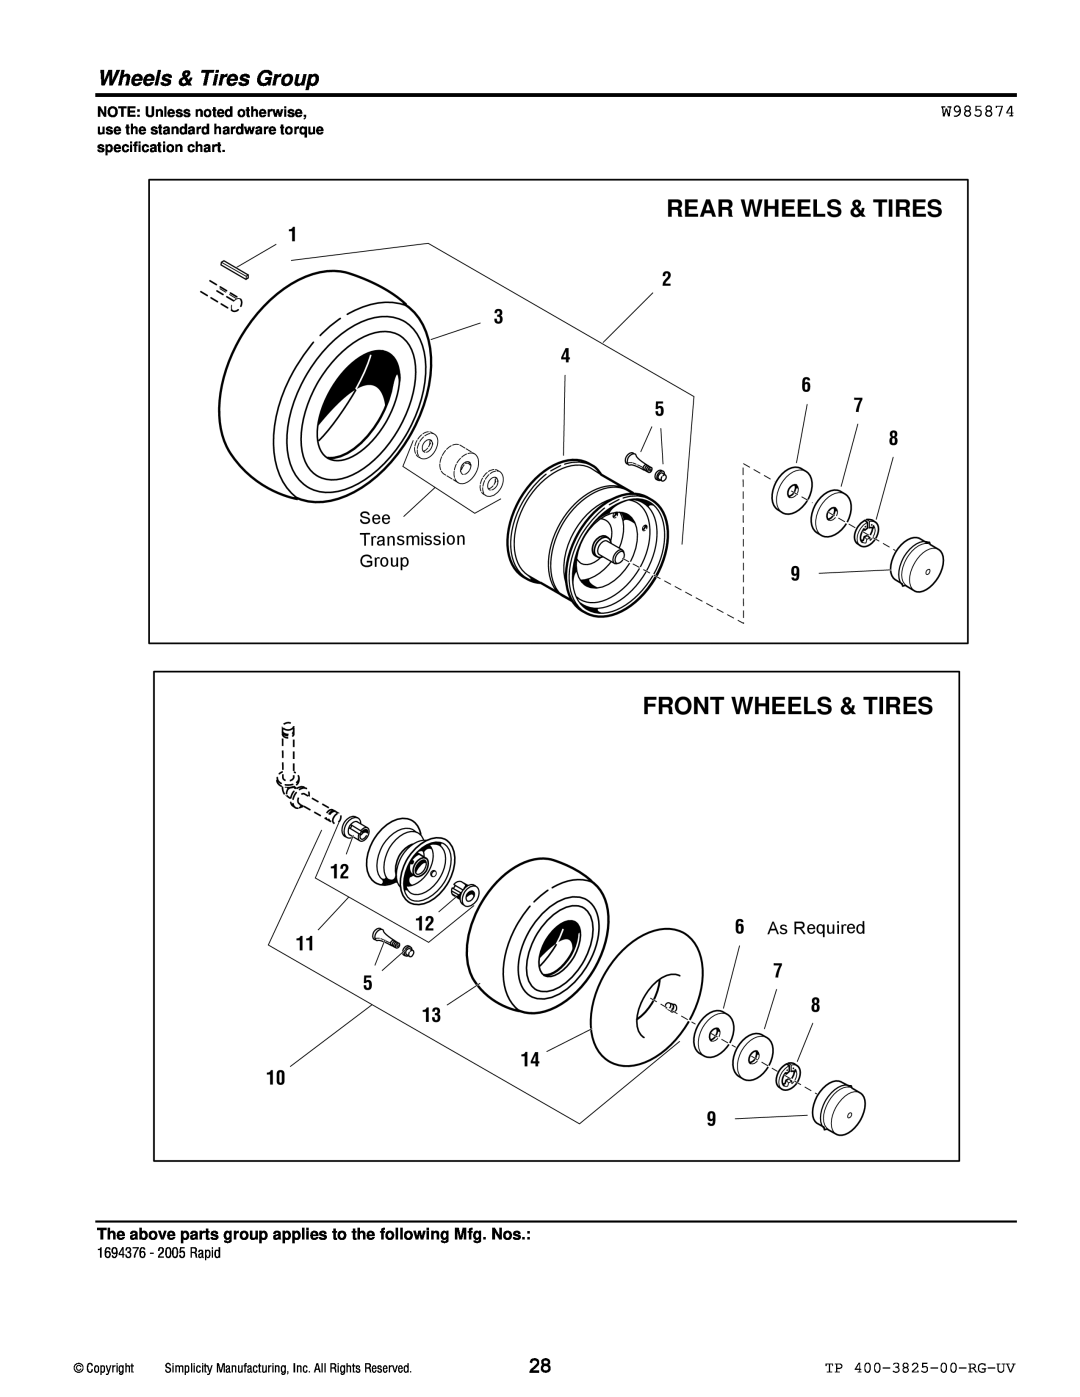 Simplicity 1694377 Rear Wheels & Tires, Front Wheels & Tires, Wheels & Tires Group, W985874, Transmission, As Required 